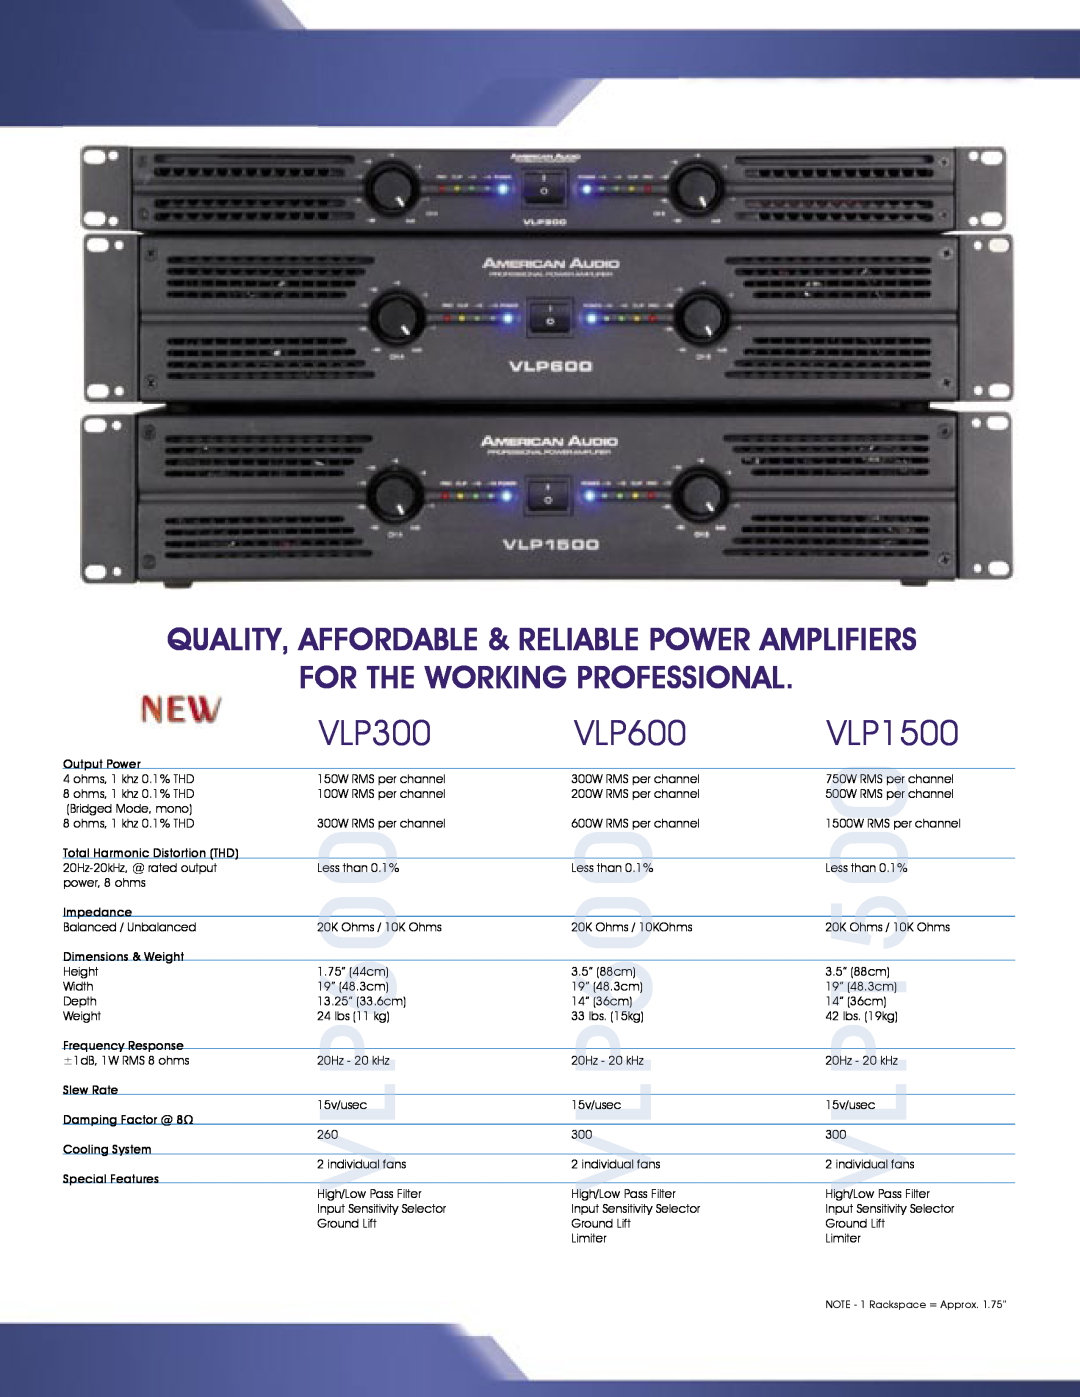 American Audio MCD-810 manual VLP300 VLP600 VLP1500, Quality, Affordable & Reliable Power Amplifiers, amplifiers 